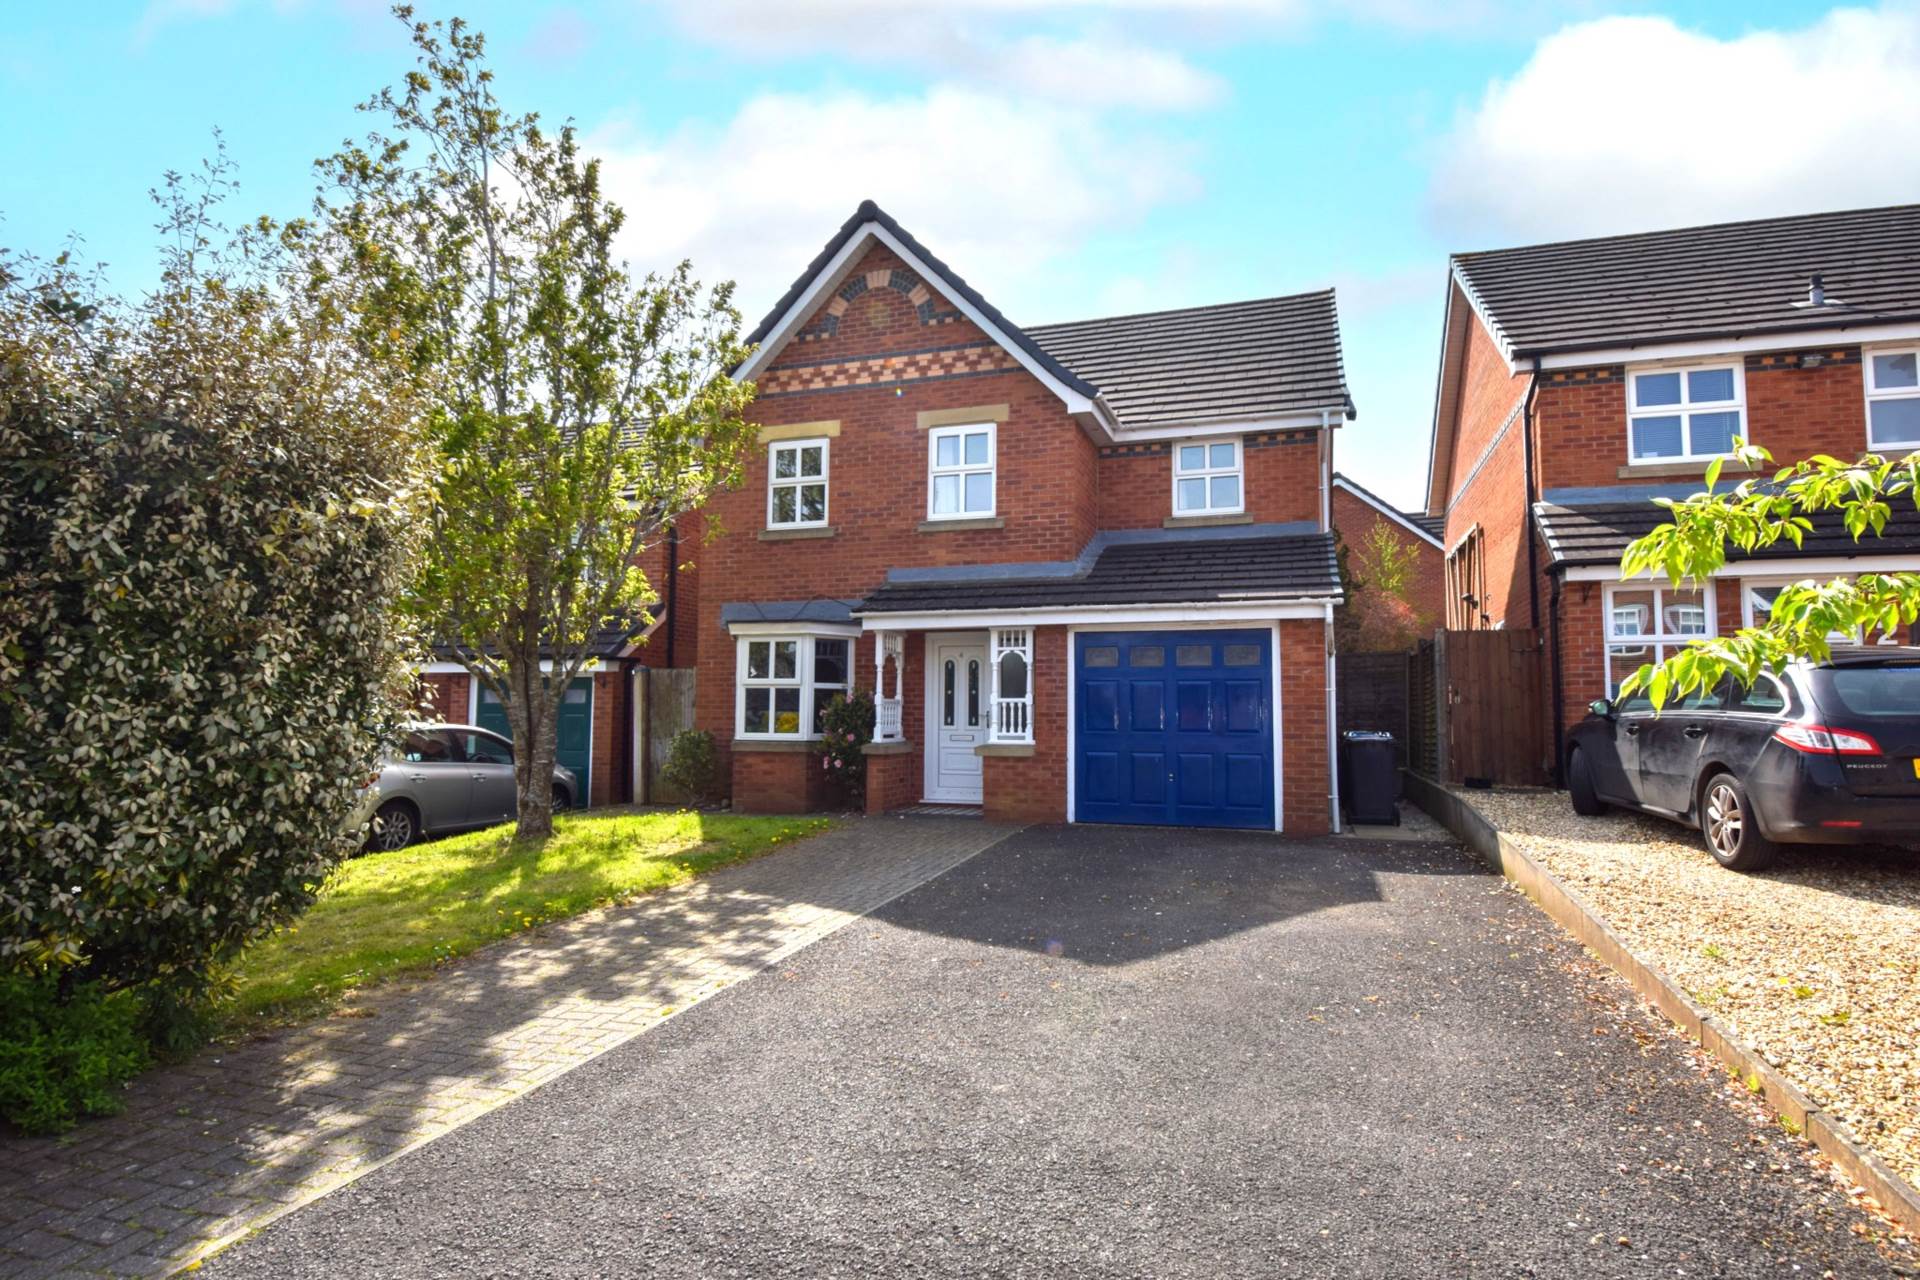 4 bed Detached House for rent in Preston. From Mi Home Estate Agents